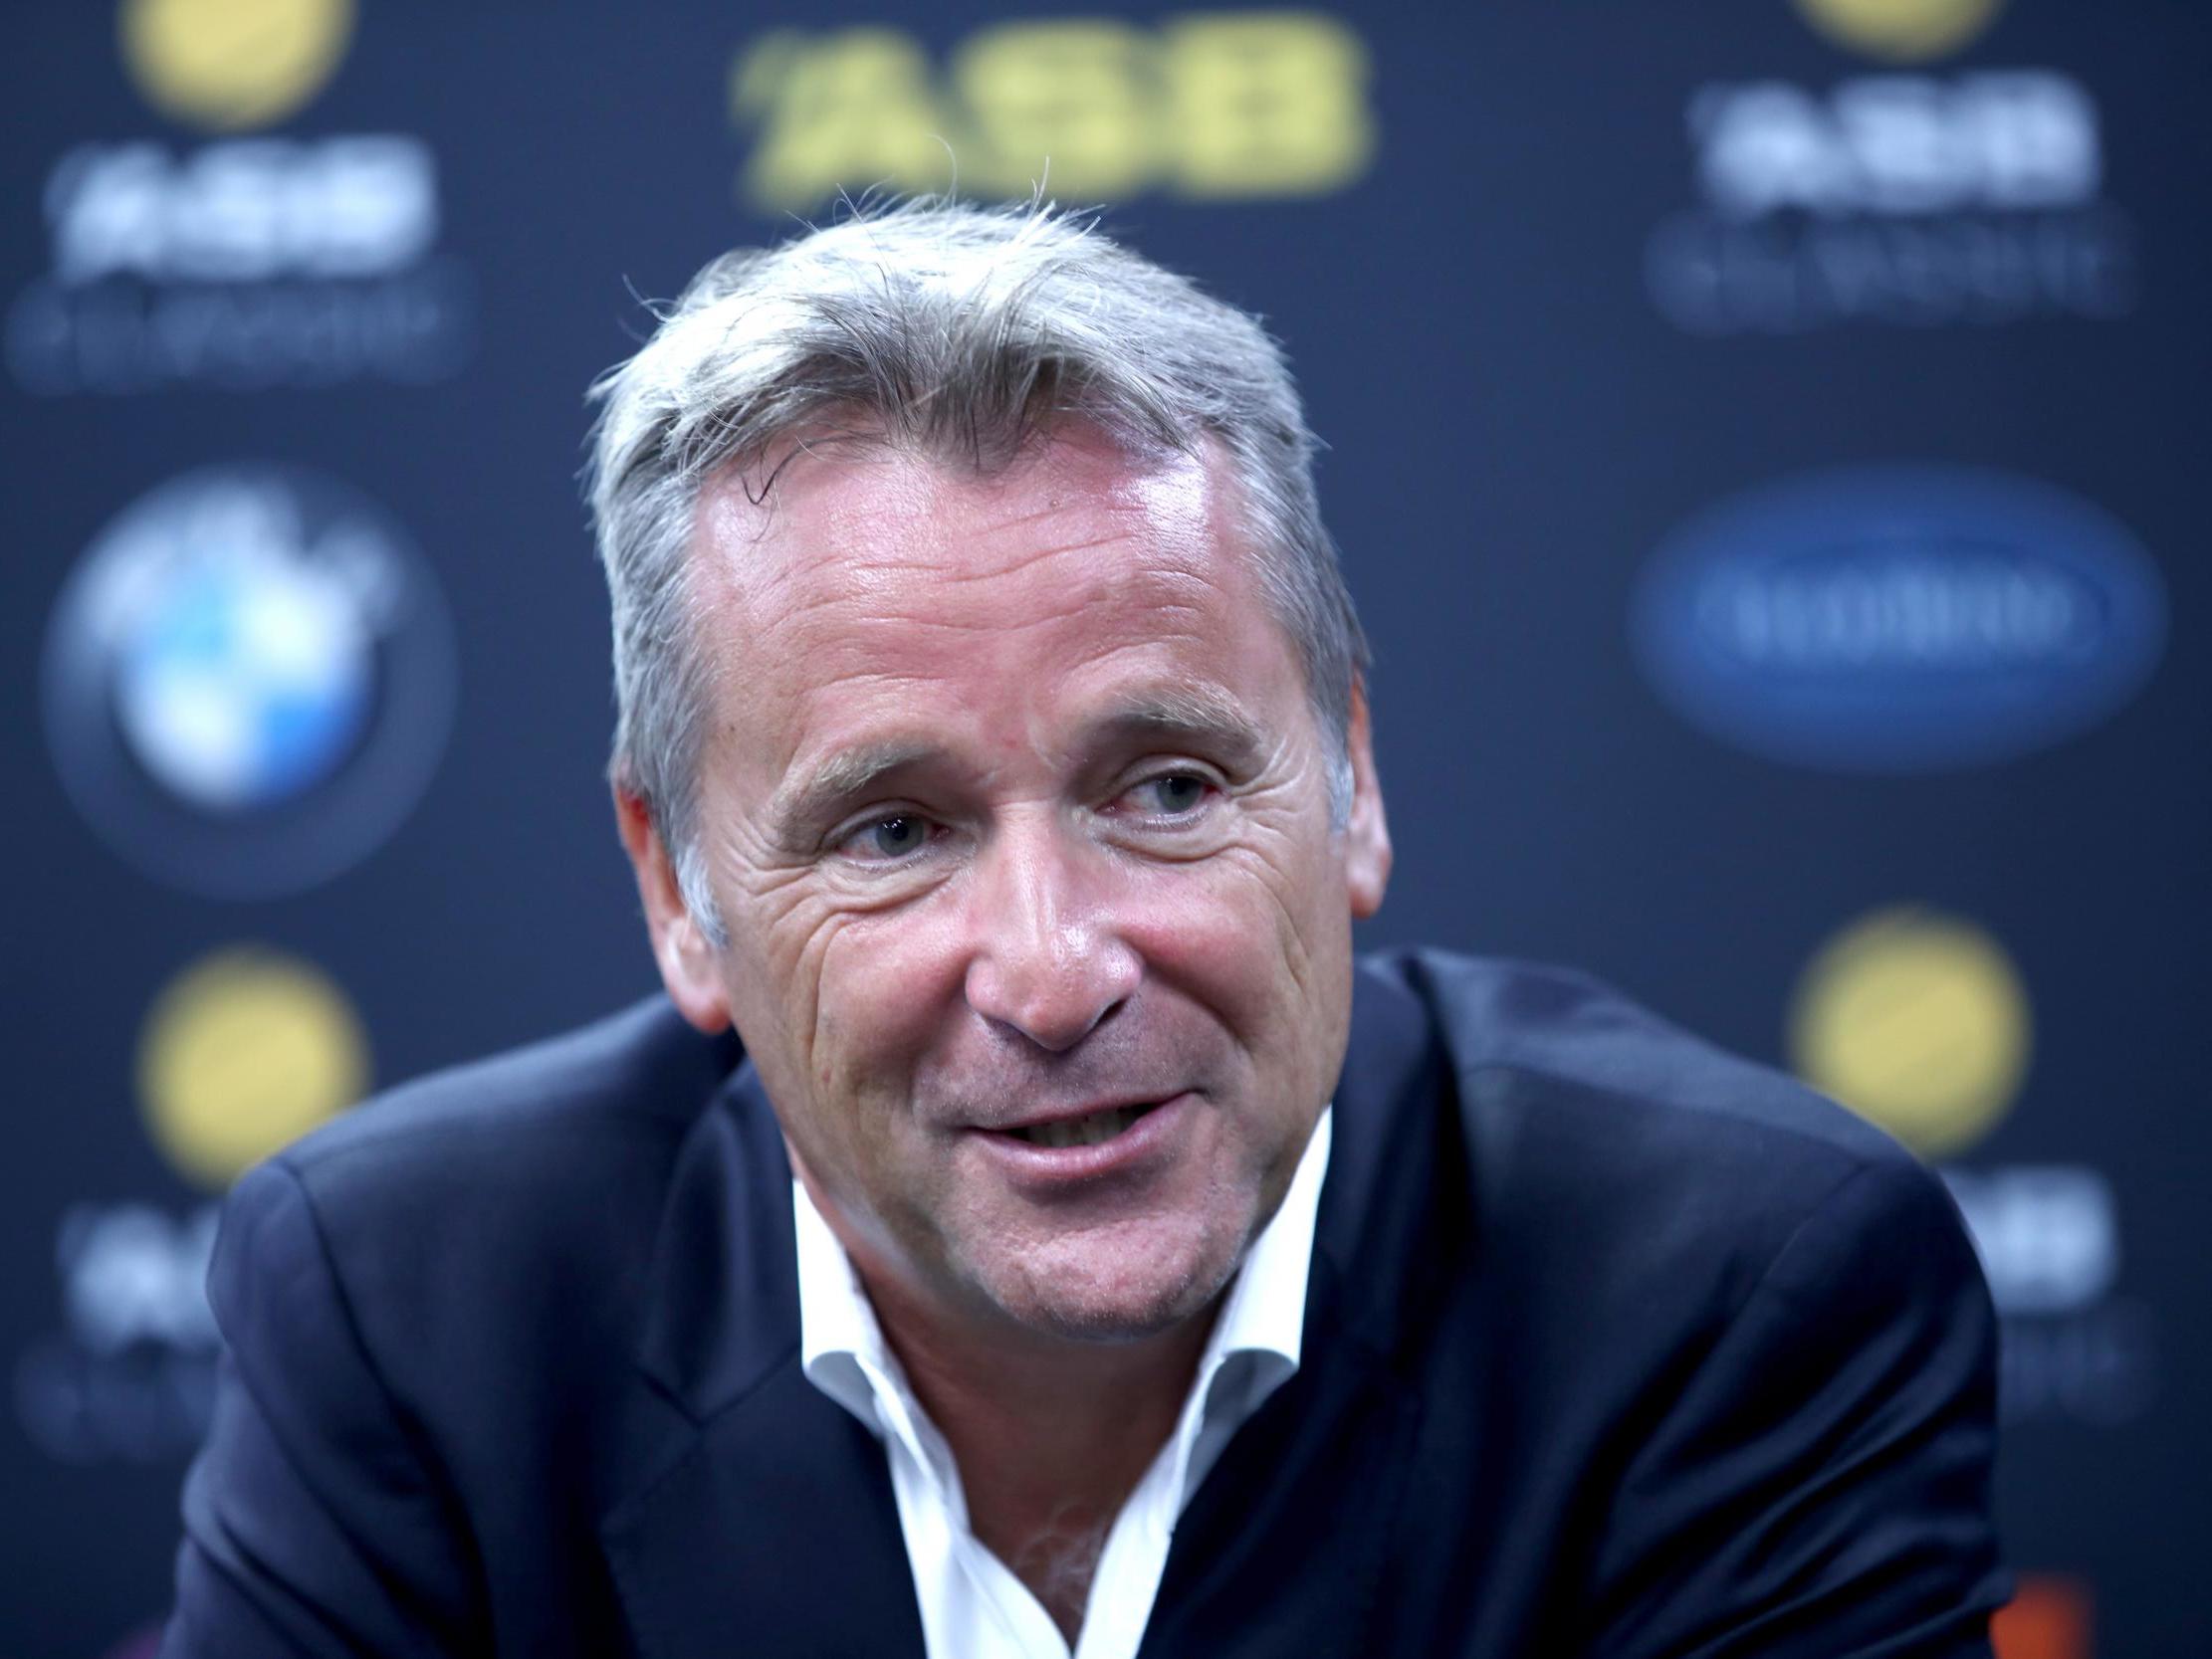 ATP president Chris Kermode said he doesn't want to rush in any dramatic changes